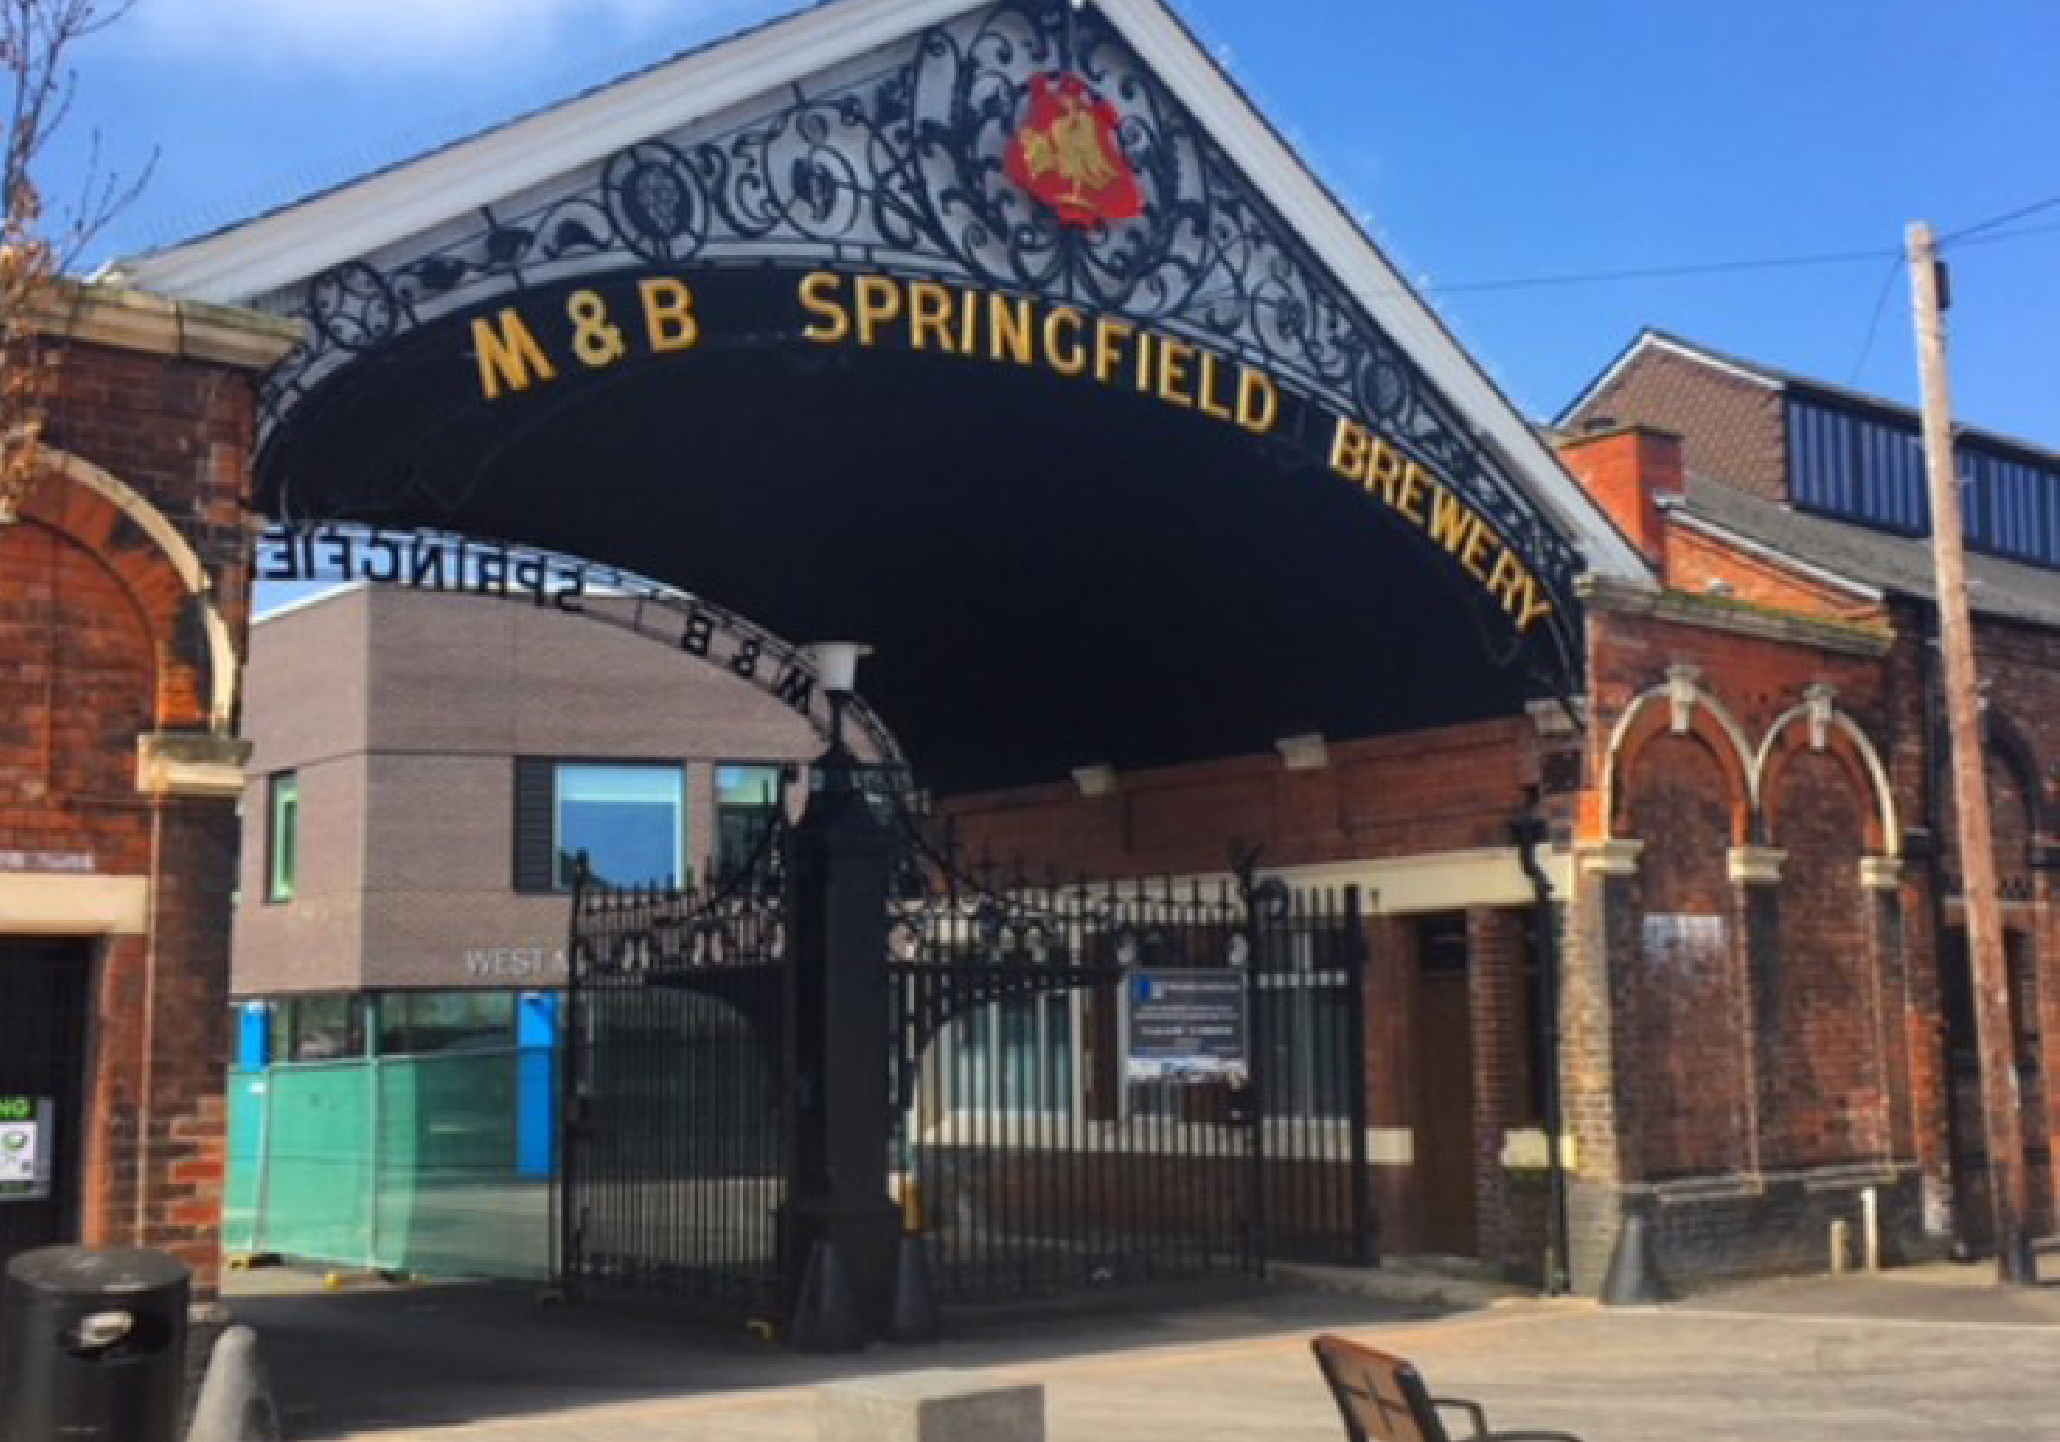 Entrance to Springfield brewery. Wrought iron black gates with ornate pitched roof above it.